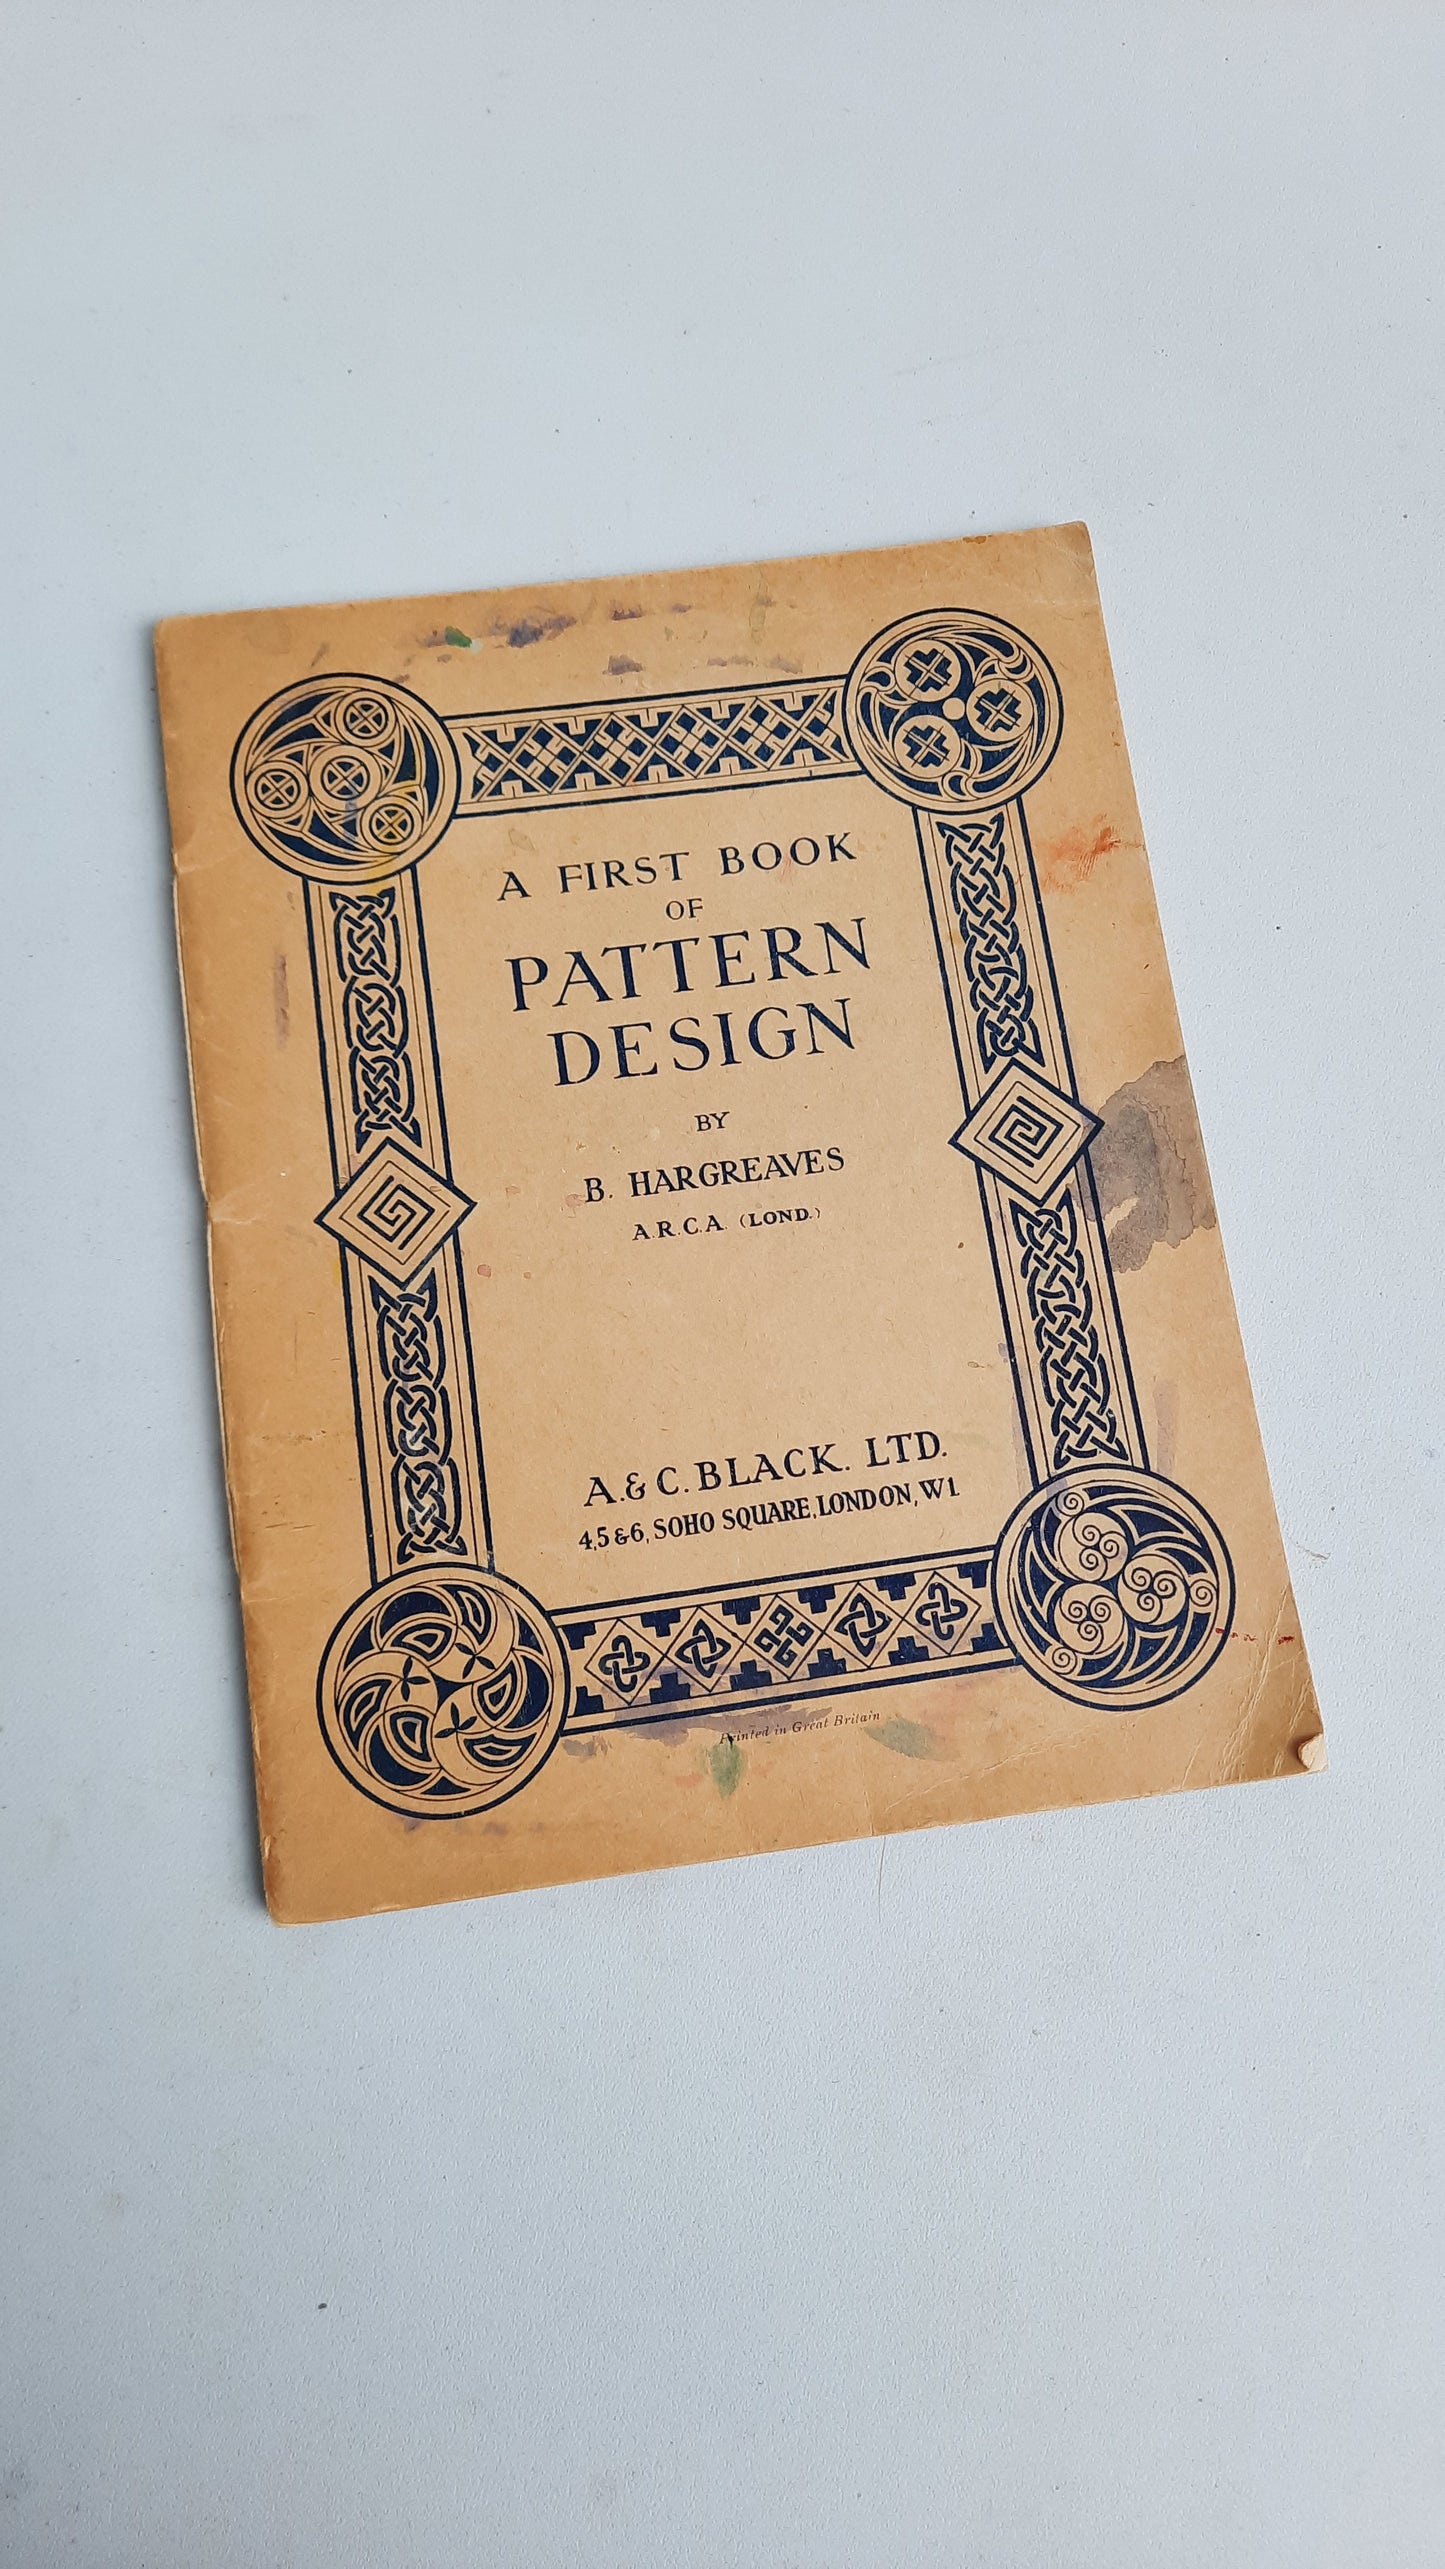 "A First Book of Pattern Design" 1952 by B. Hargreaves